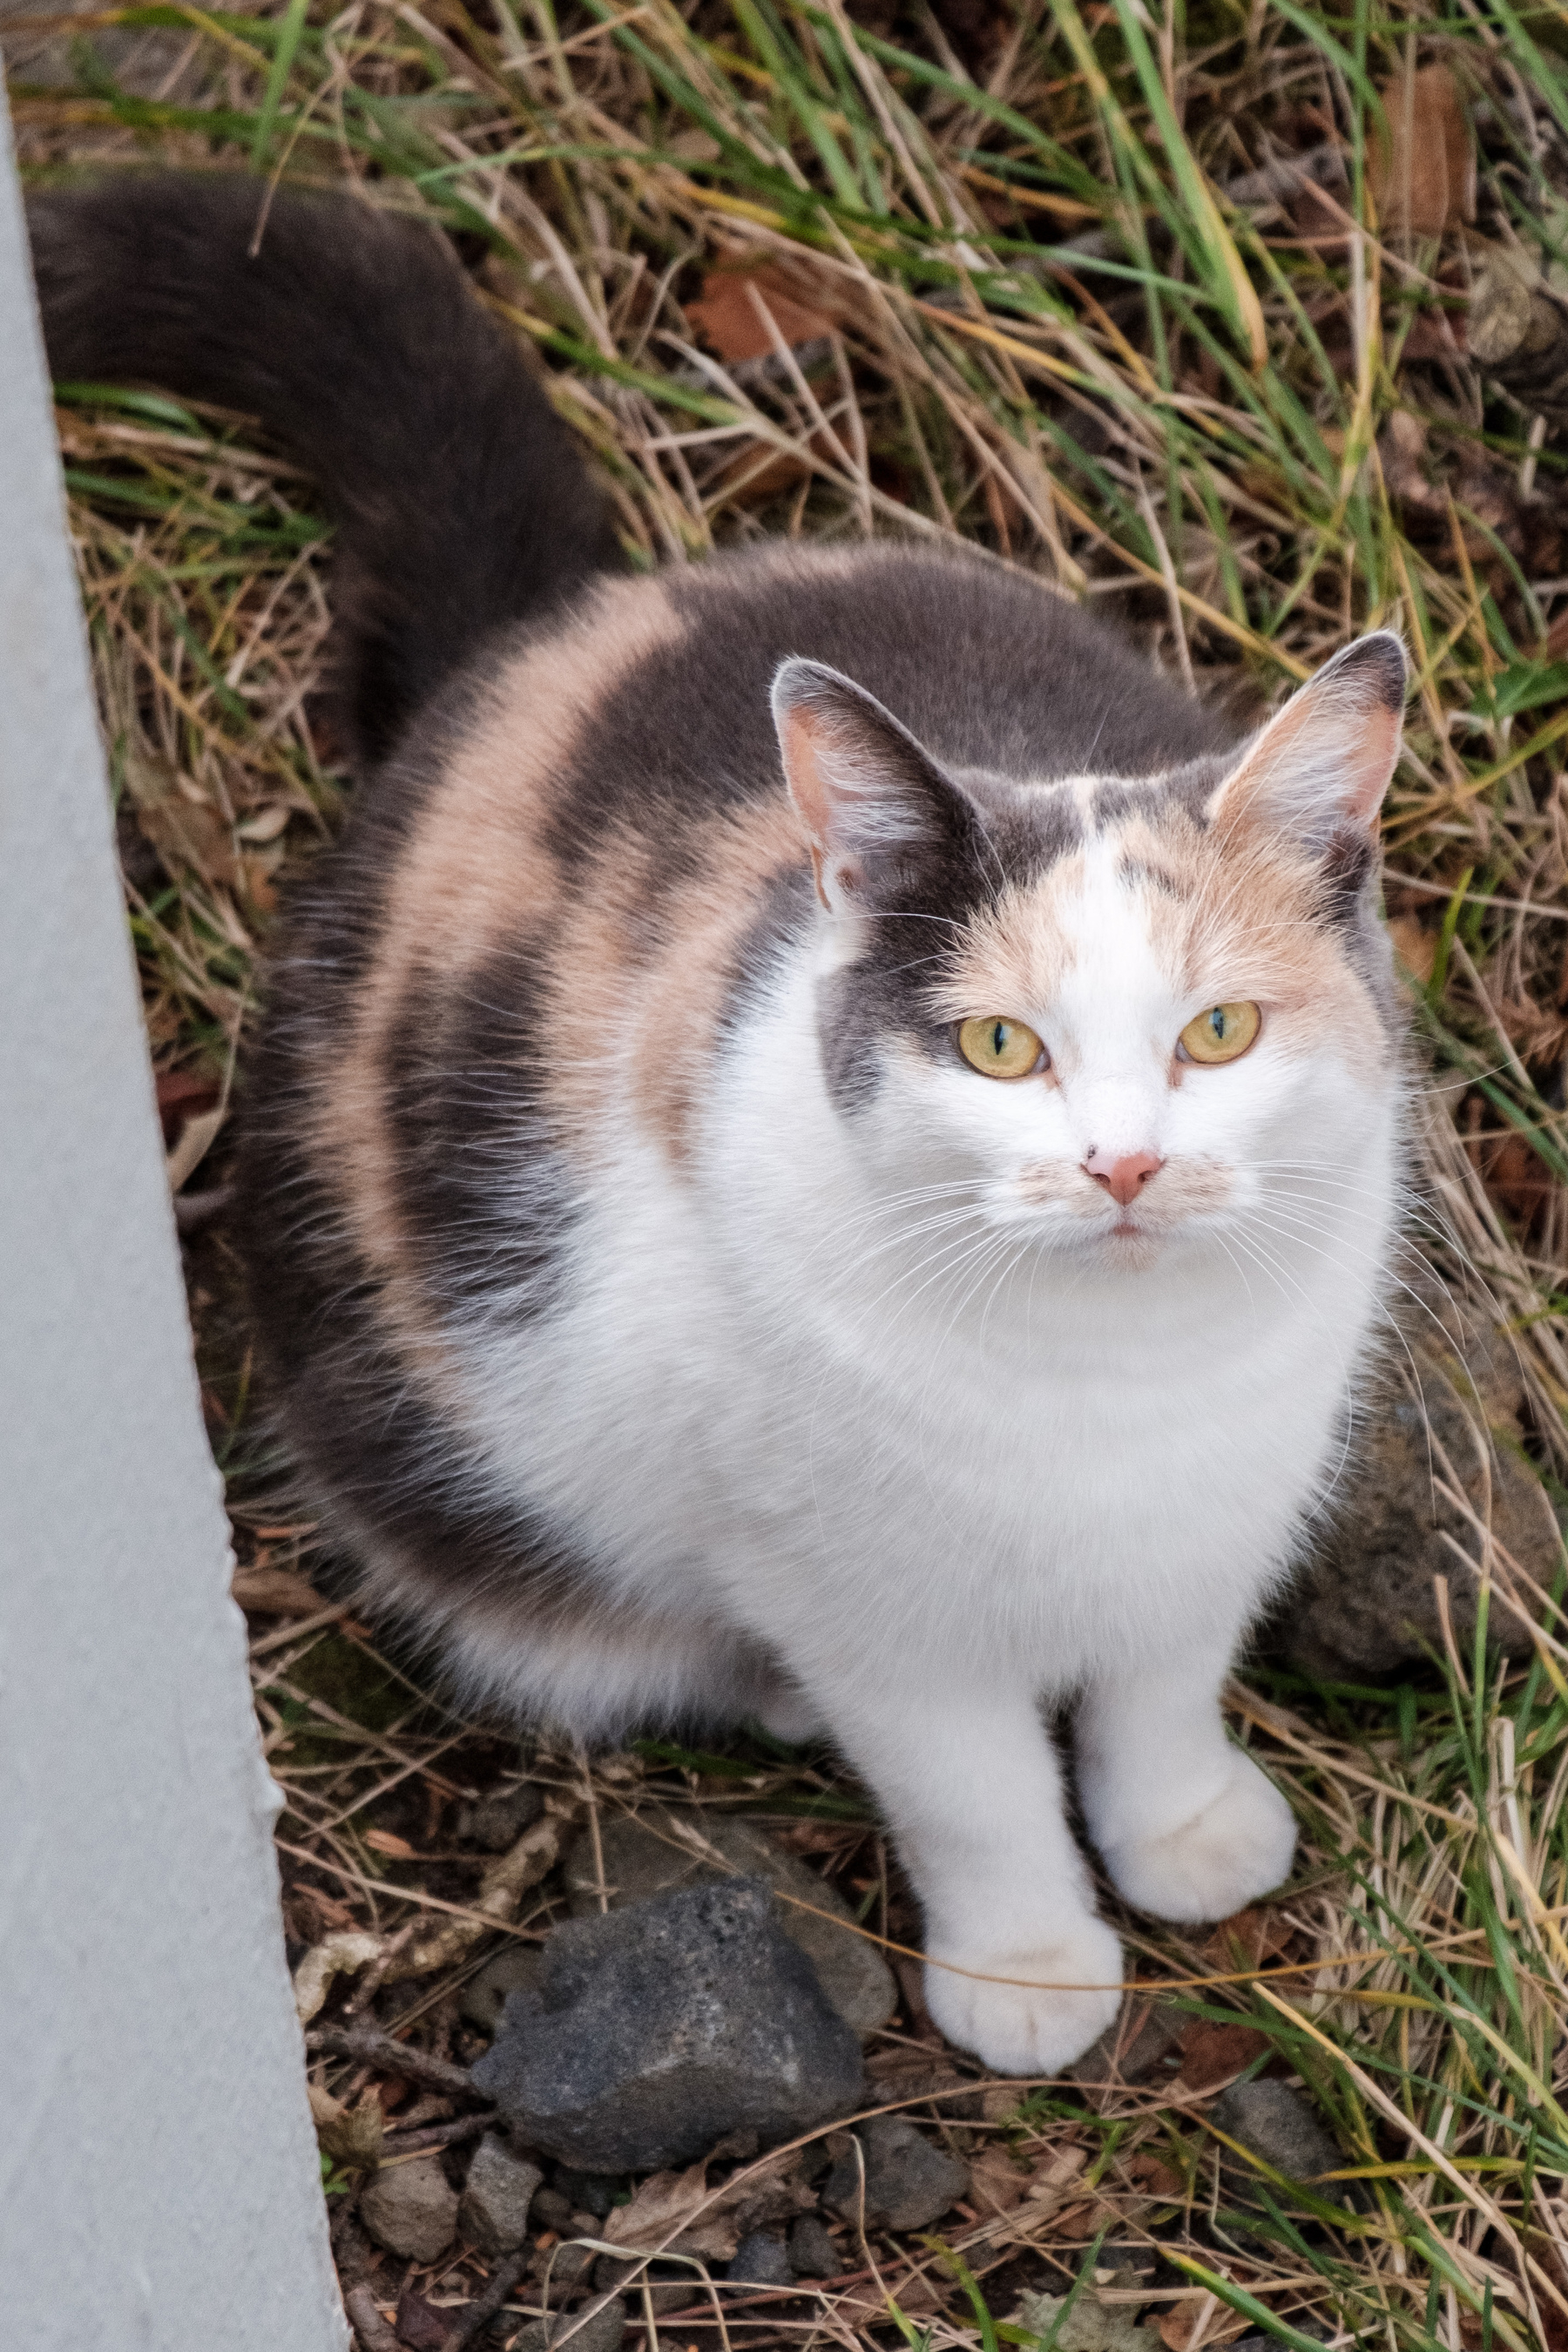 A calico cat sits in the grass and looks up at the photographer (me).